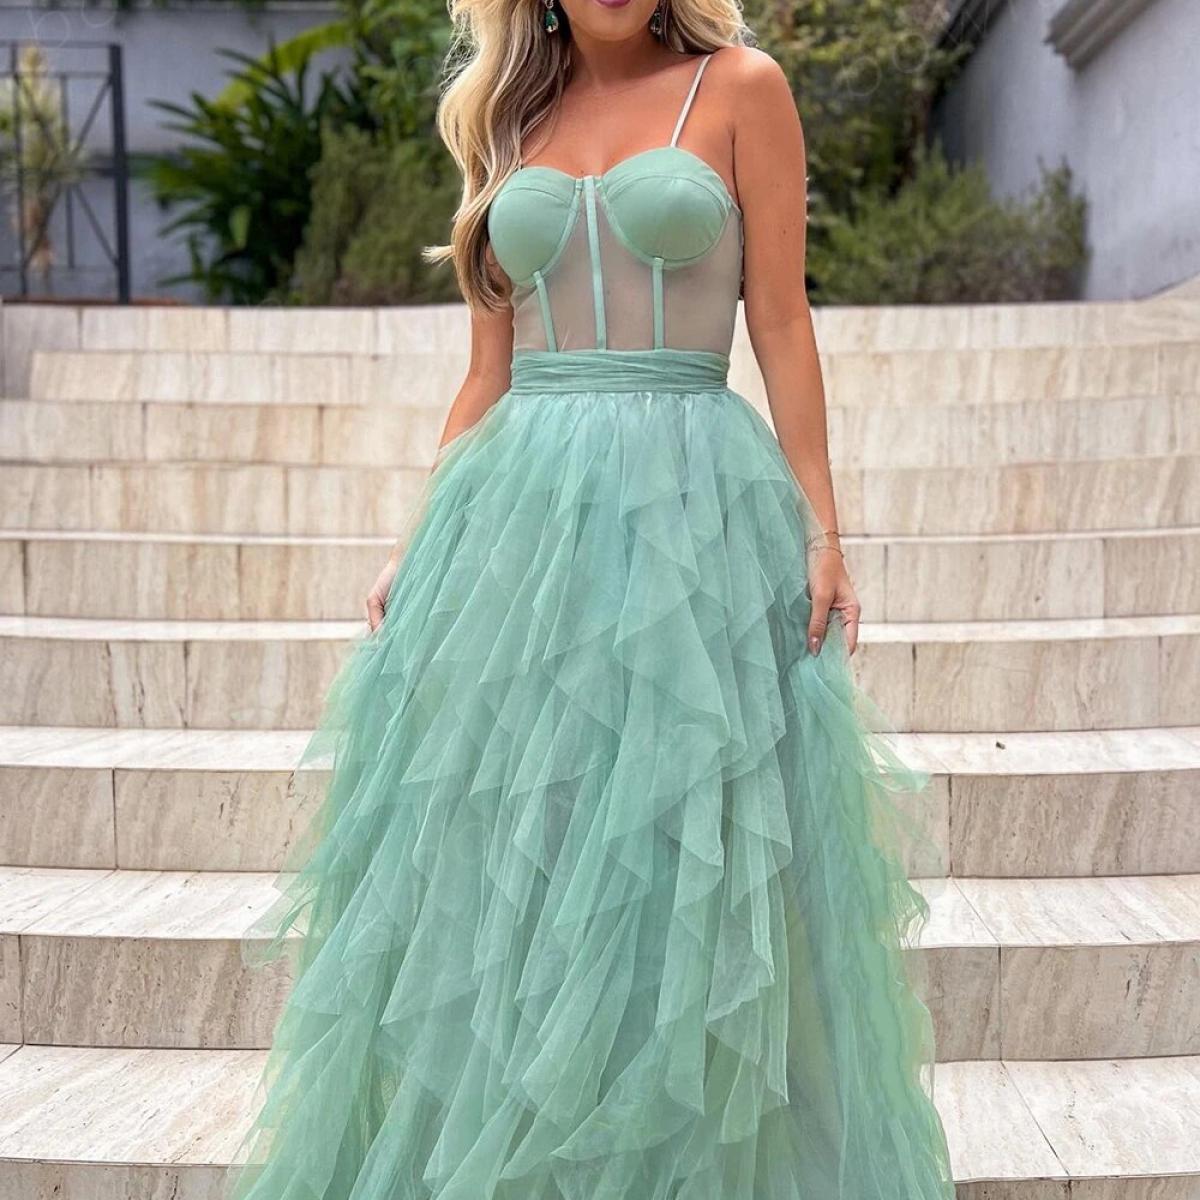 Bowith Puffy Evening Party Dresses Weetheart Prom Dresses For Women A Line Wedding Party Dresses With Belt Vestidos De F